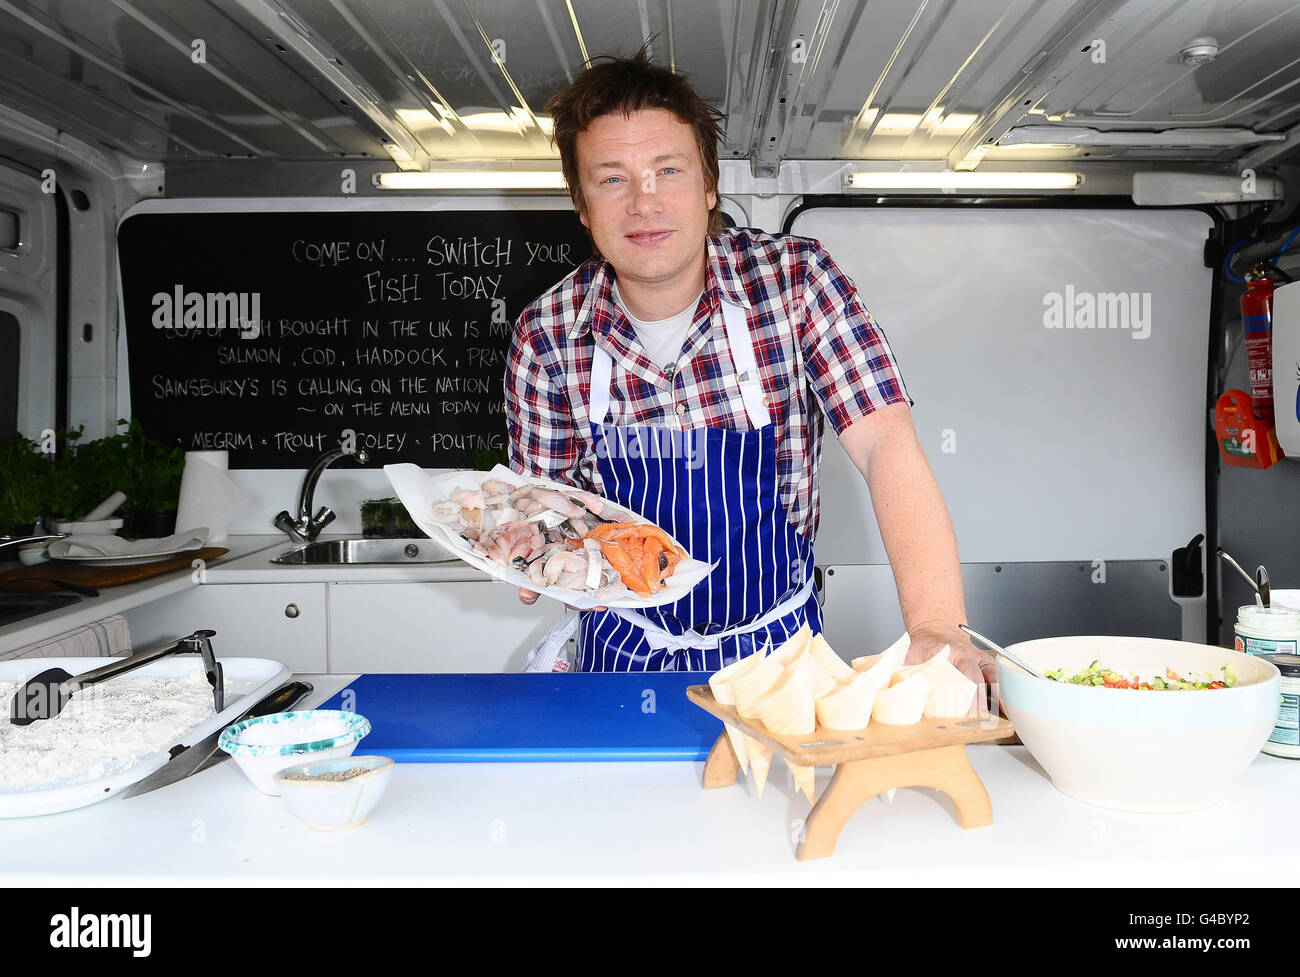 Jamie Oliver launches Sainsbury's 'Switch The Fish' campaign in Richmond, handing out freshly cooked samples of sustainable fish such as pouting, megrim and coley. Stock Photo